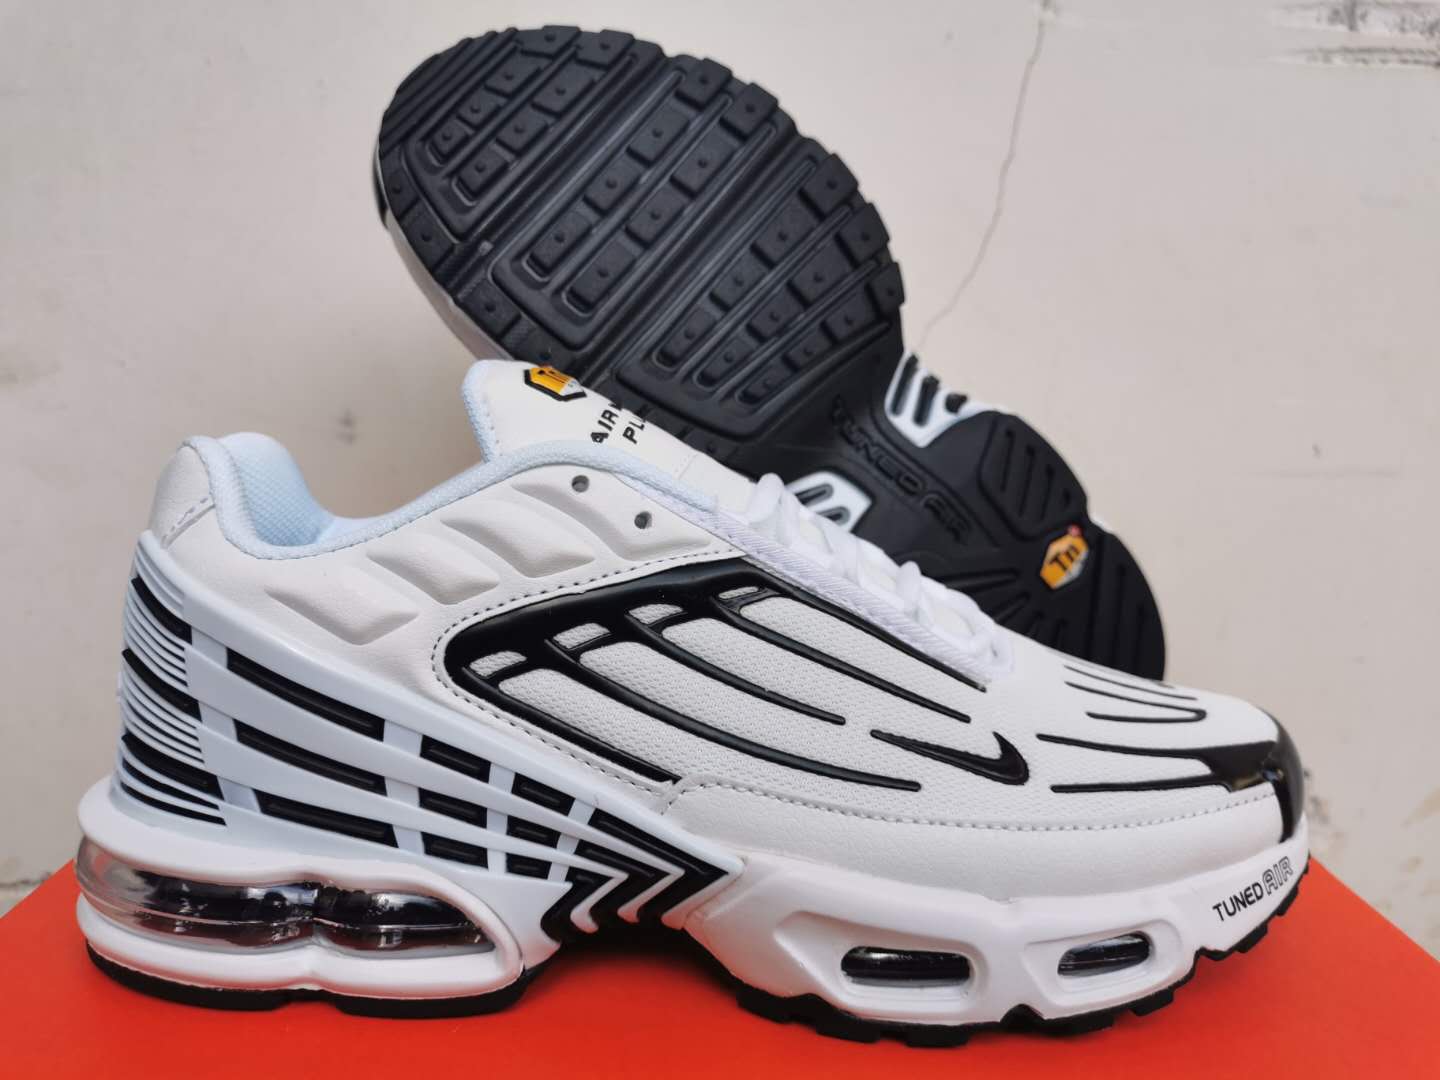 Women's Hot sale Running weapon Air Max TN Shoes 020